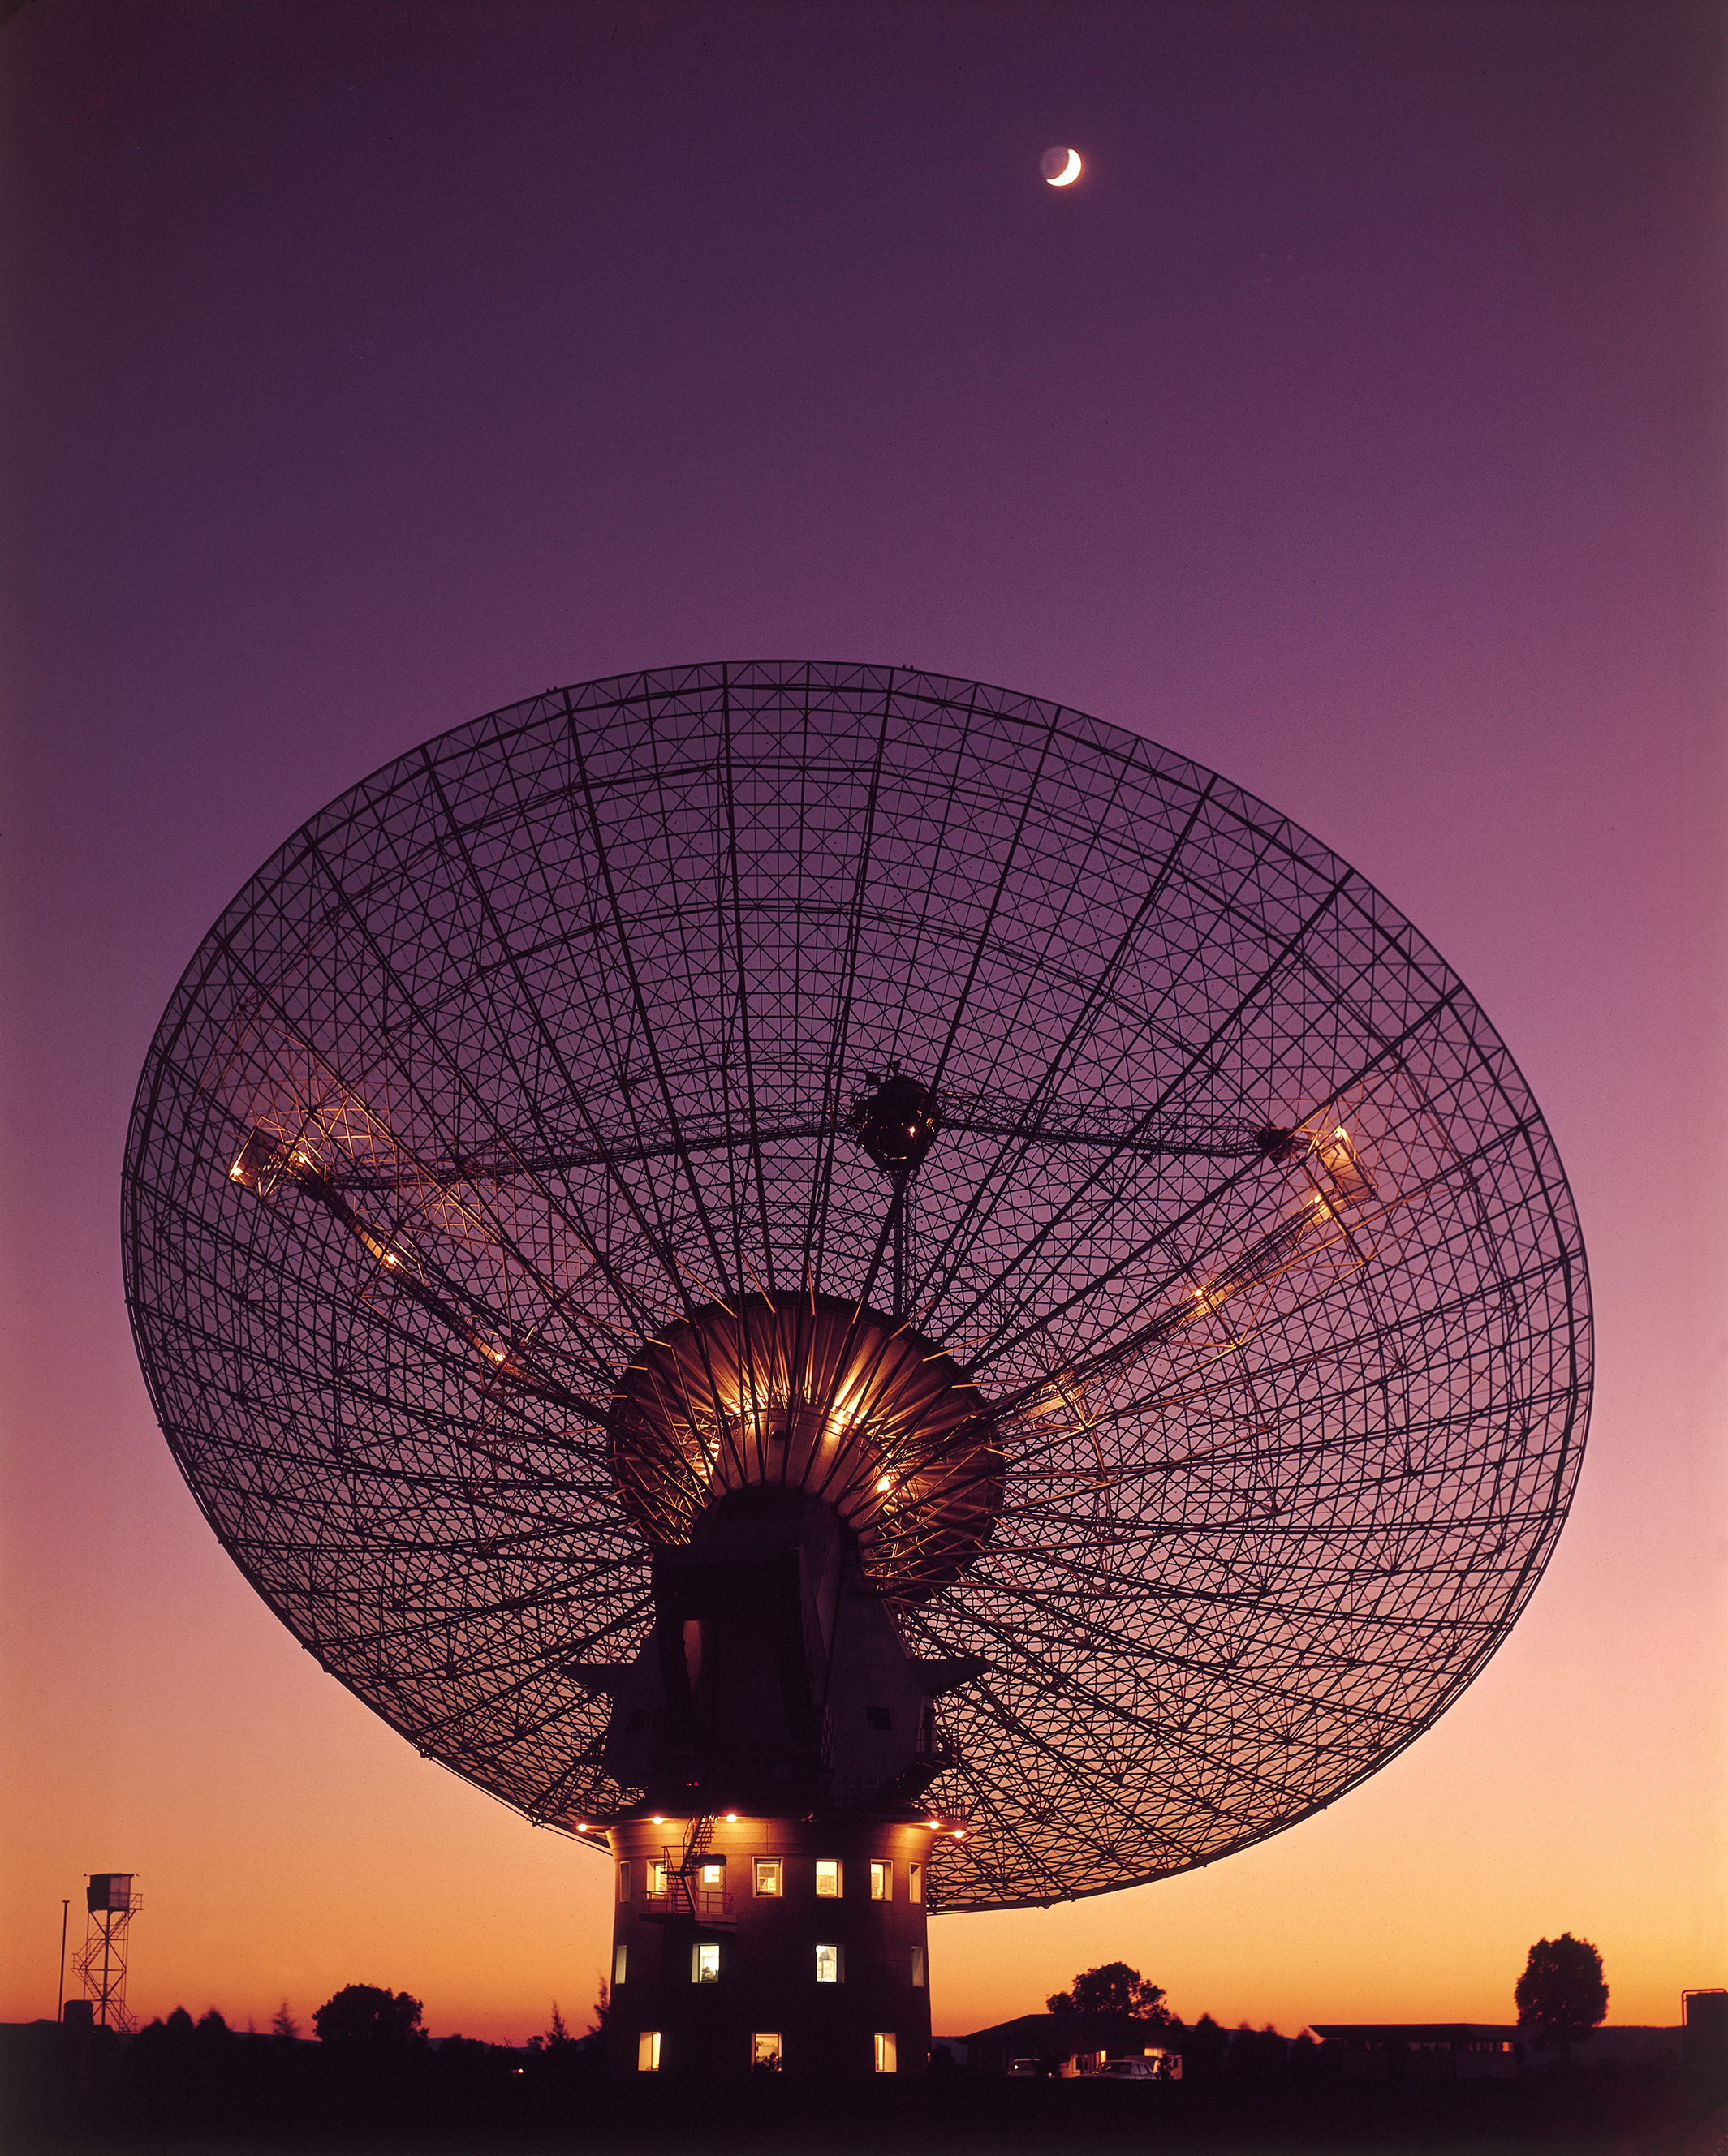 The silhouette of a large radio telescope dish at sunset. The Moon is high in the sky above it.